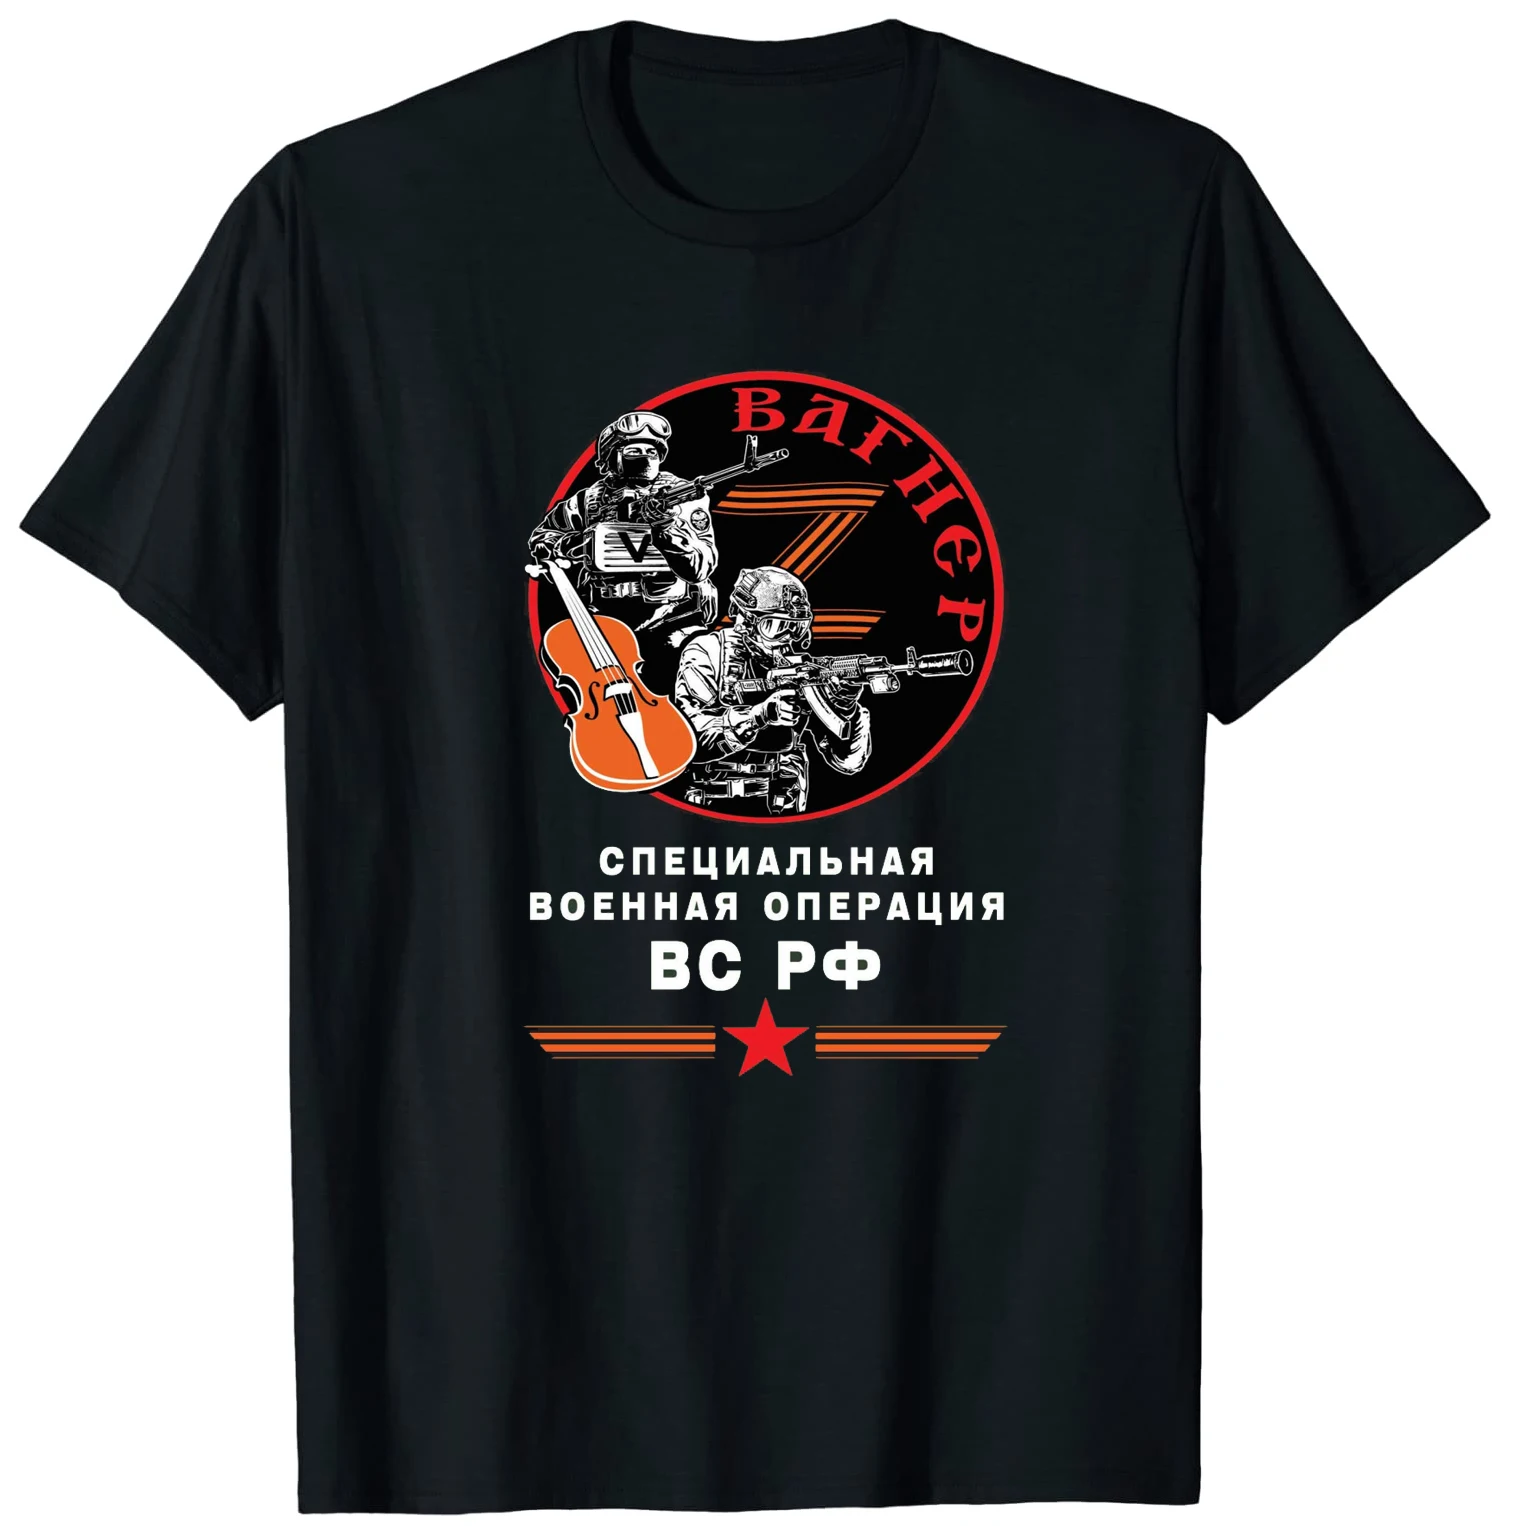 

Russian Special Military Operations Wagner Group Band Warrior T-Shirt 100% Cotton O-Neck Summer Short Sleeve Casual Mens T-shirt